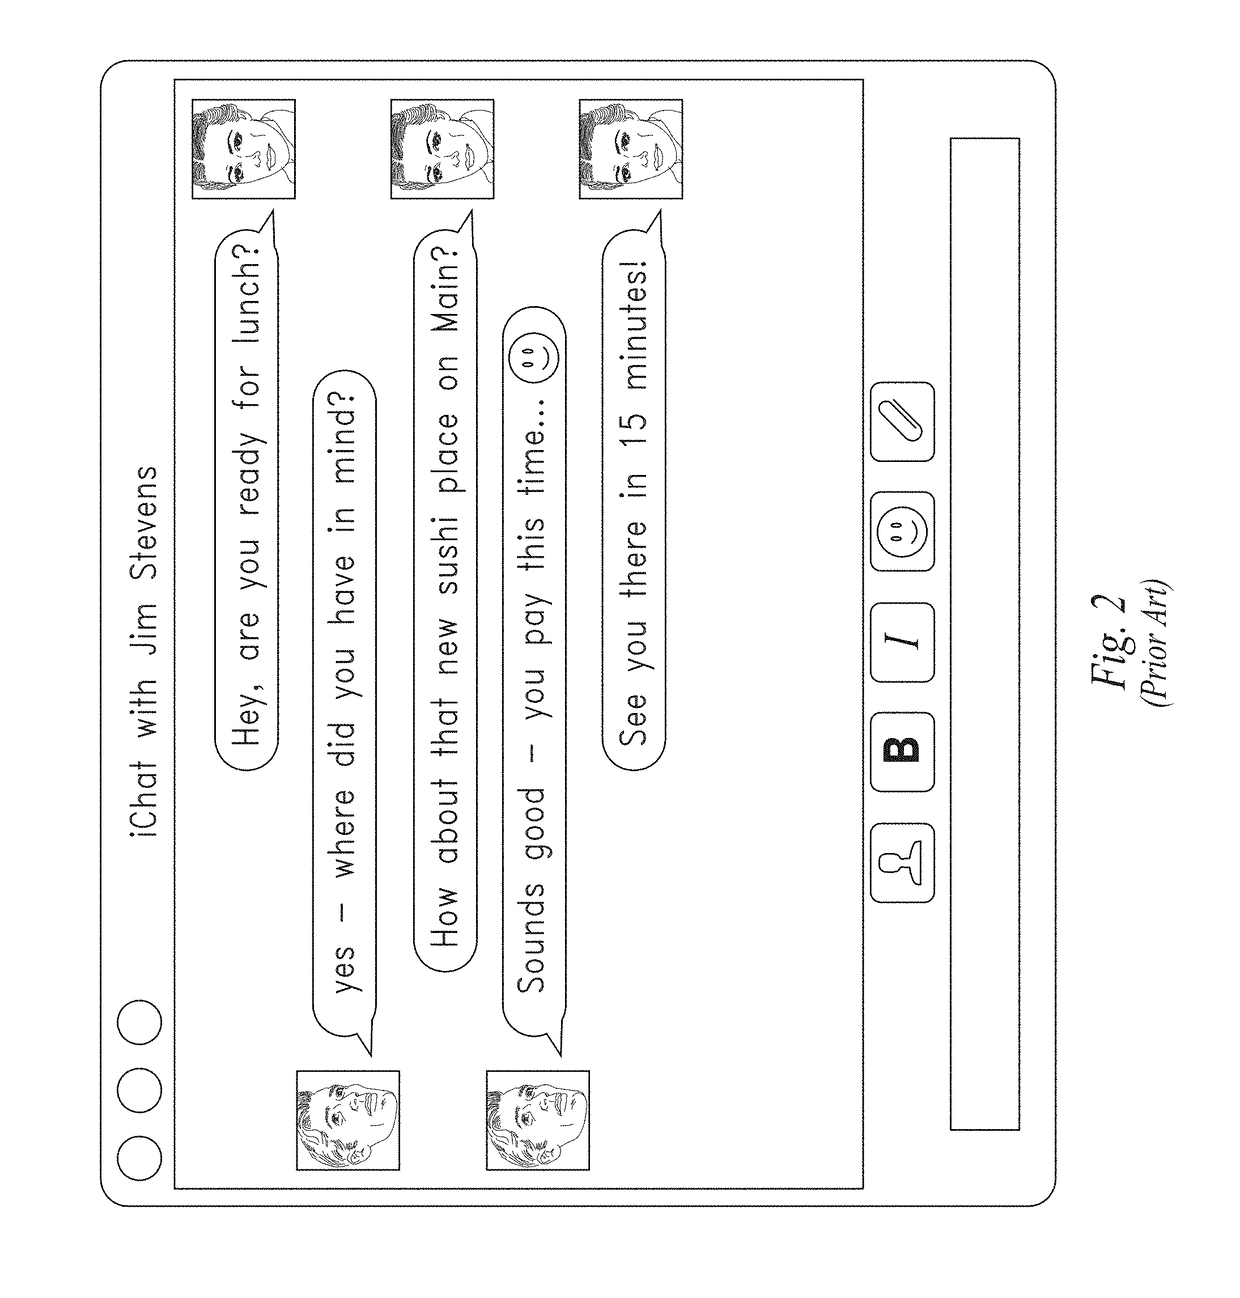 System and method for increasing clarity and expressiveness in network communications